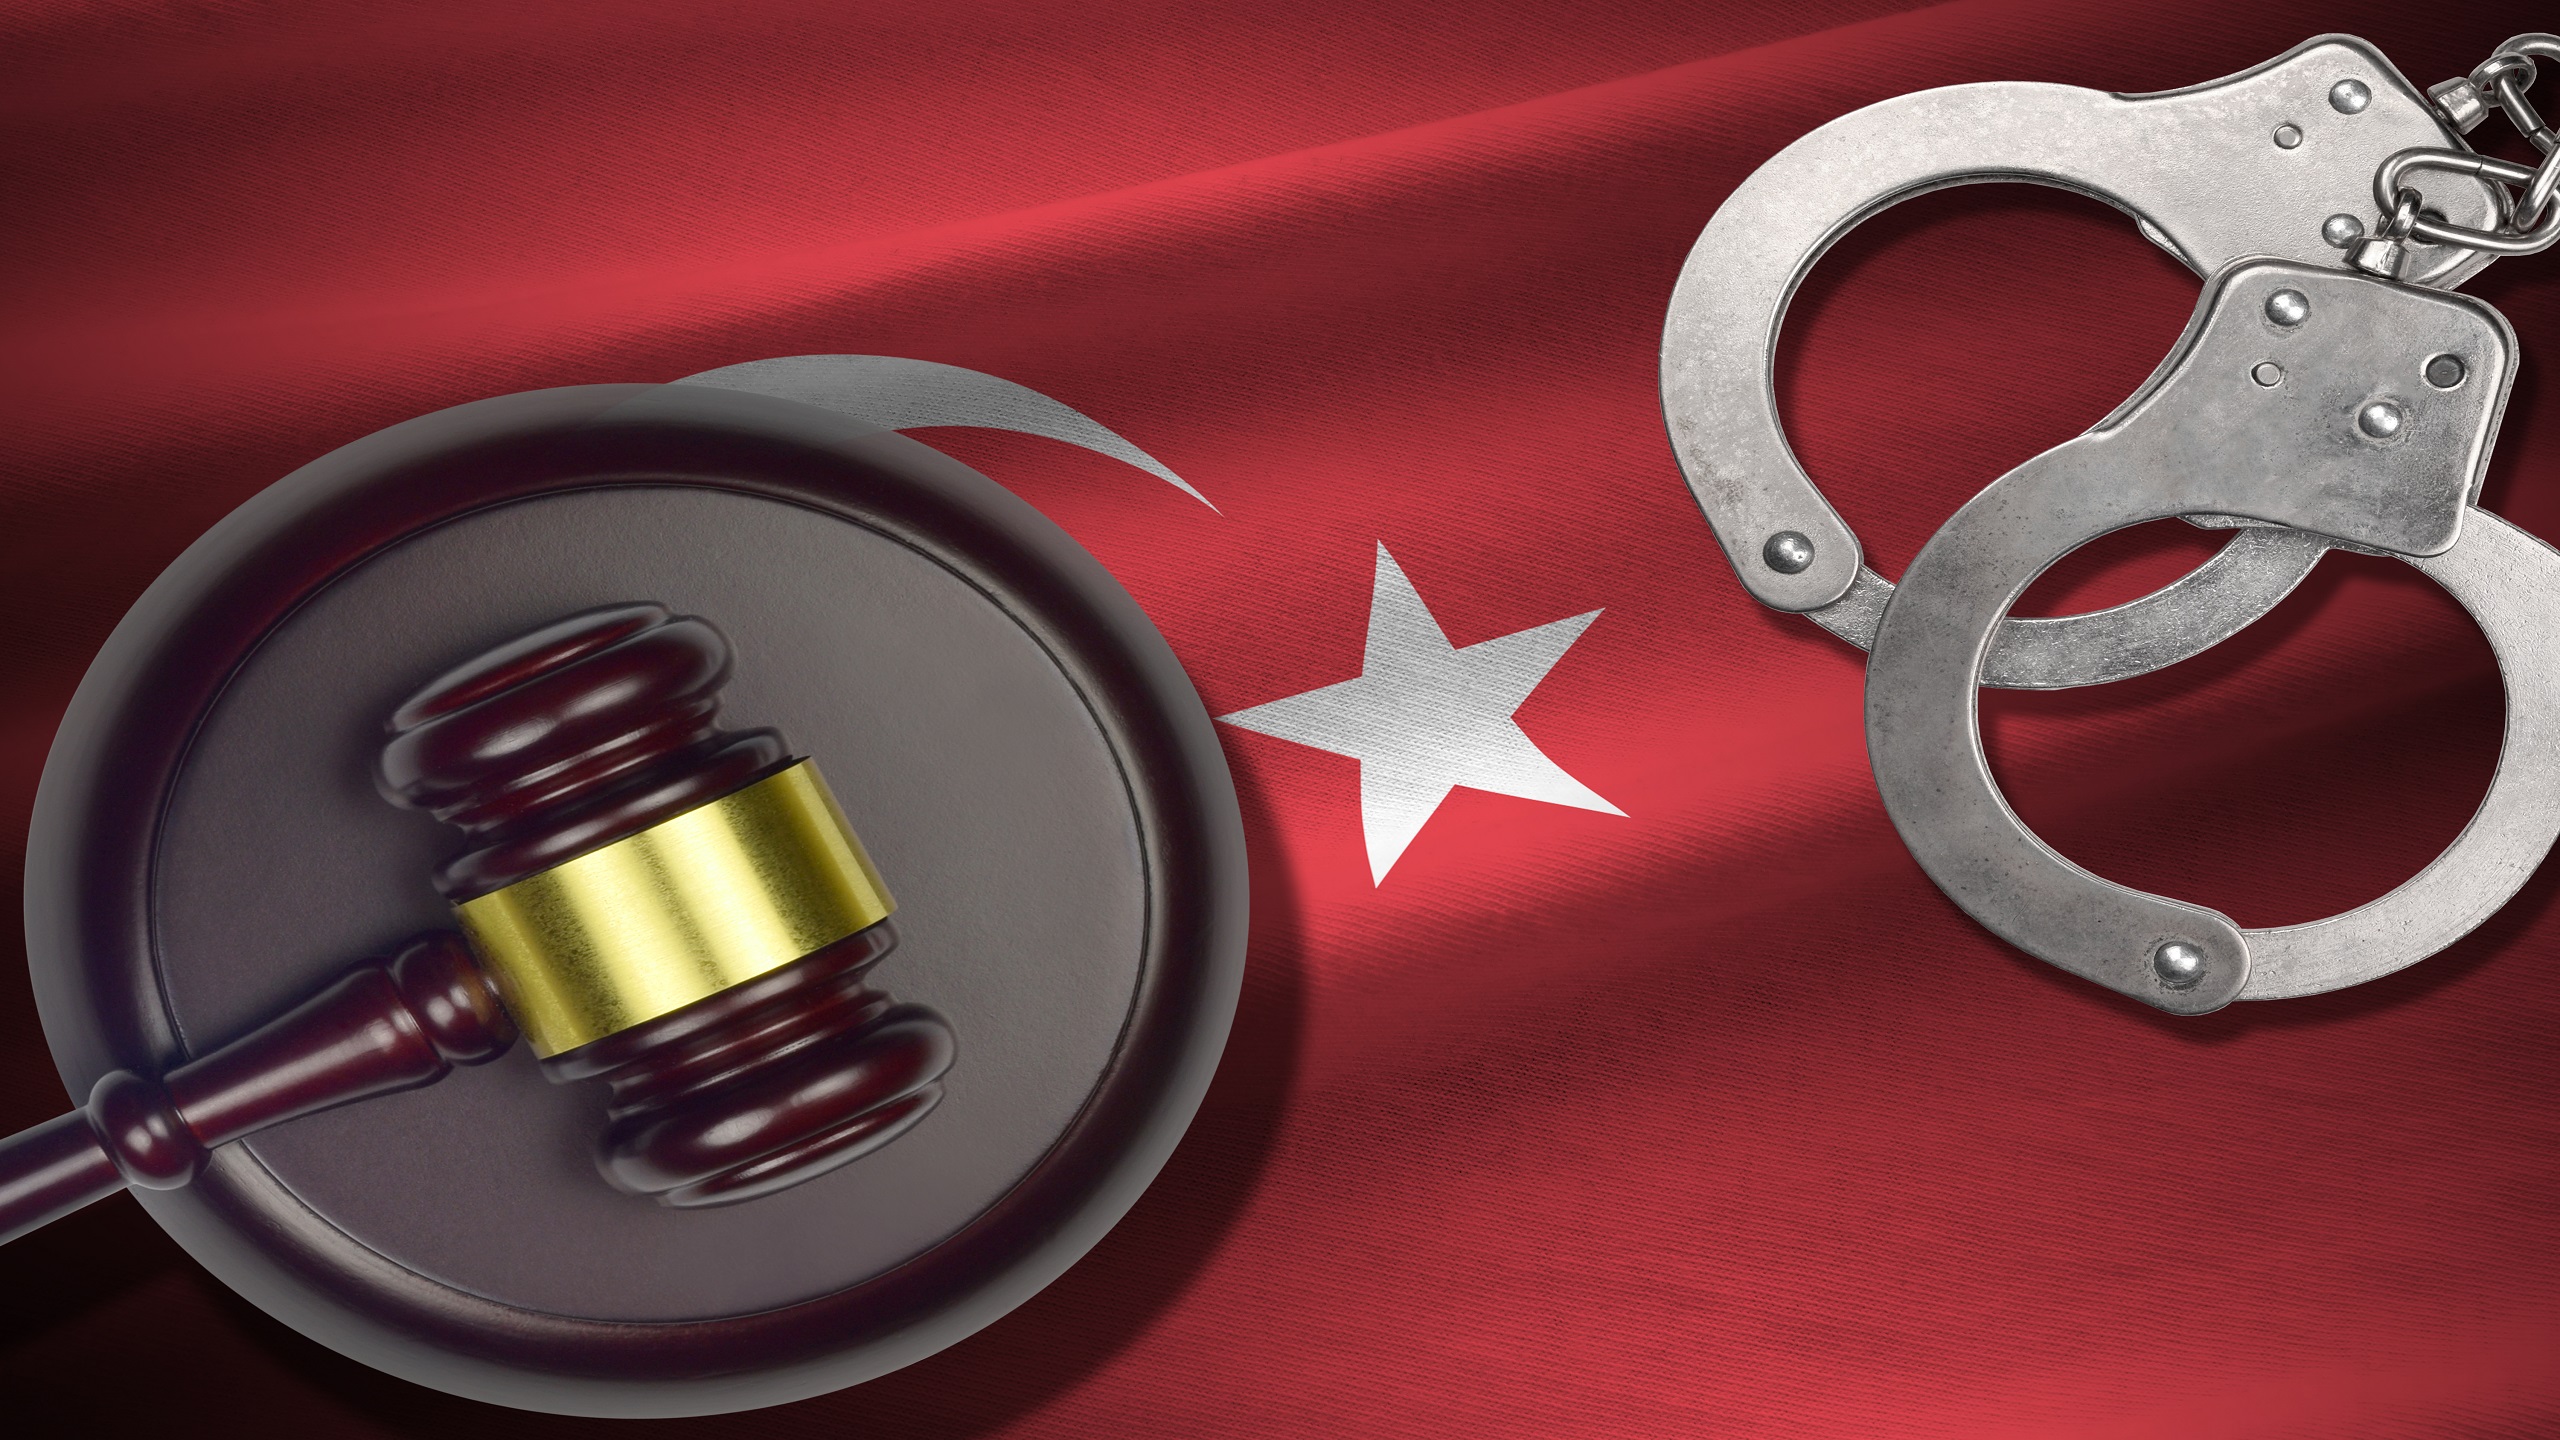 Turkey Detains 33 People on Charge of Spying for Israel